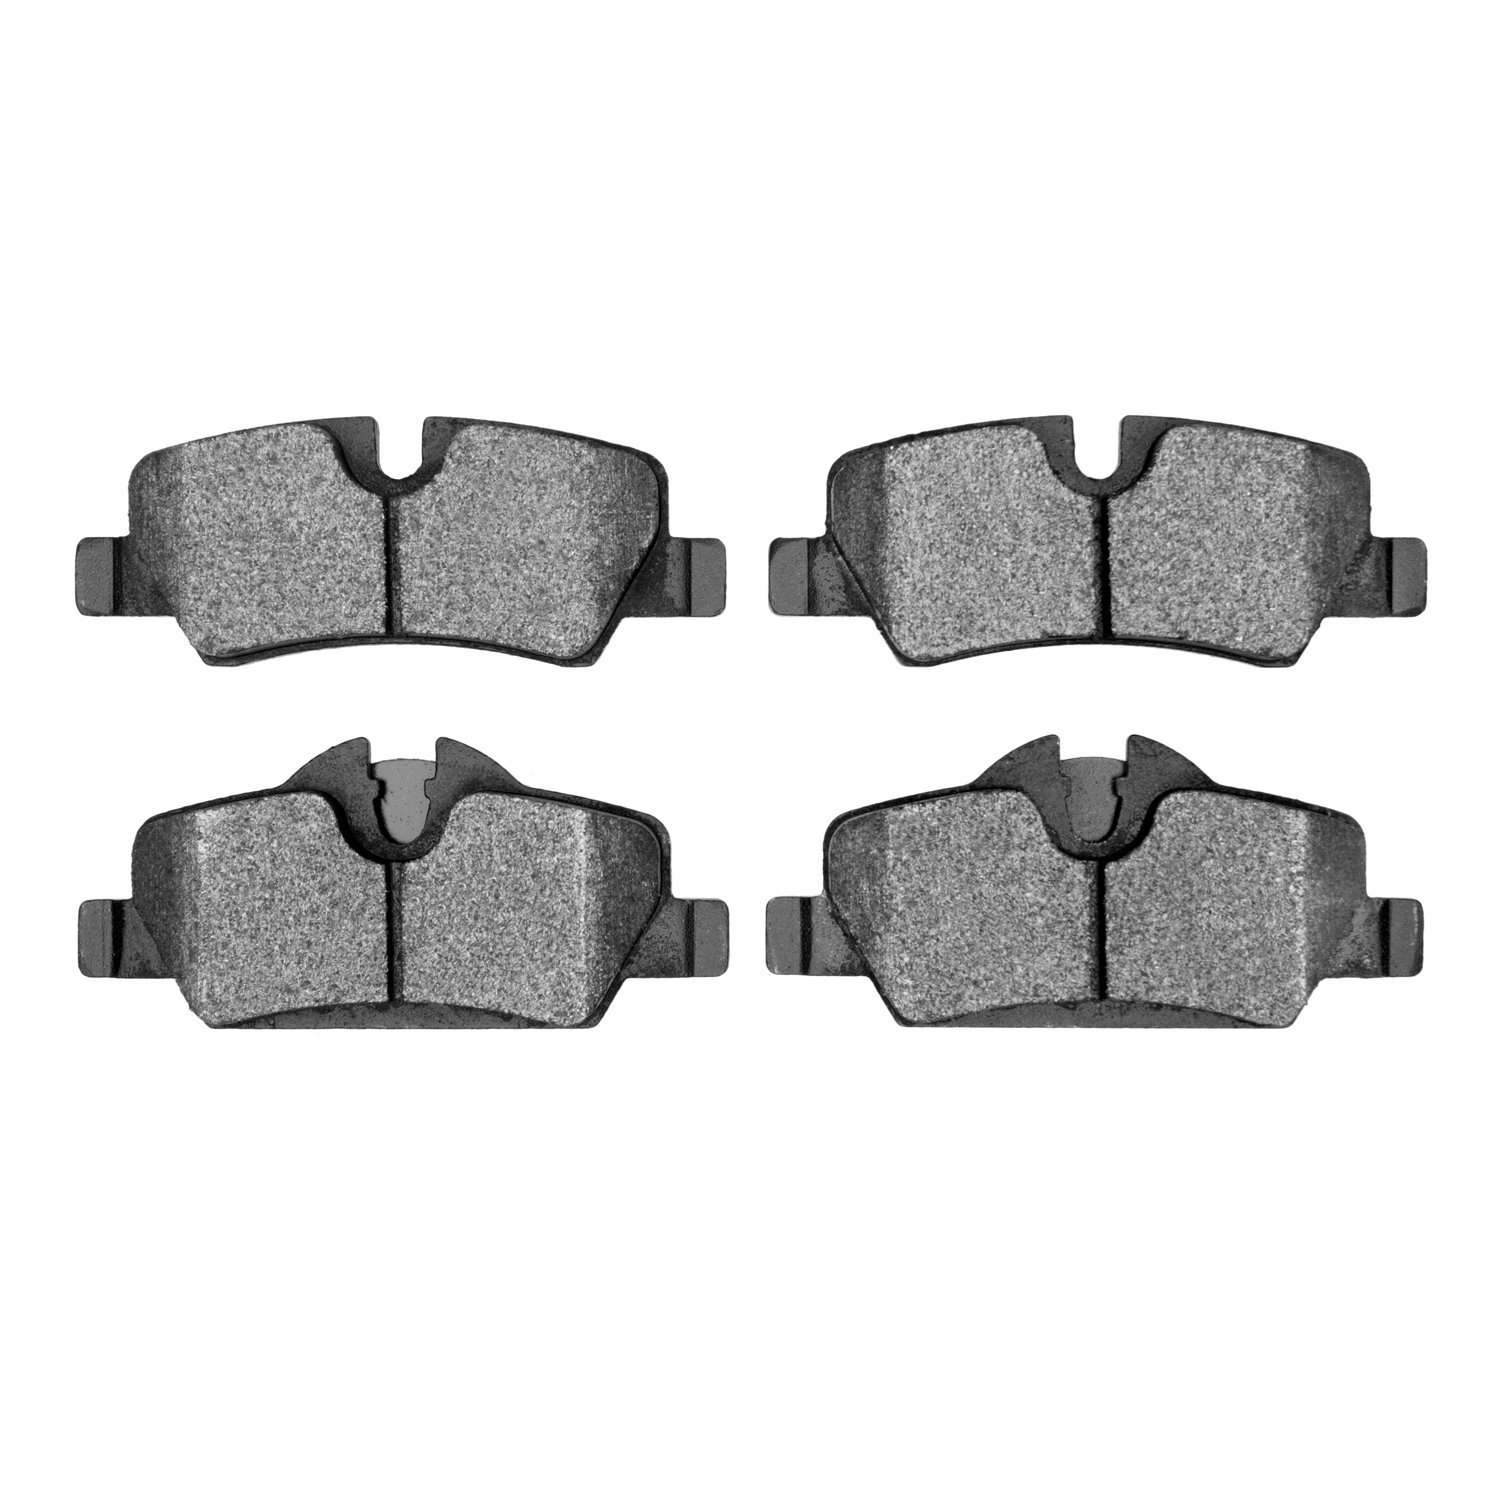 1115-1800-00 Active Performance Low-Metallic Brake Pads, Fits Select Mini, Position: Rear